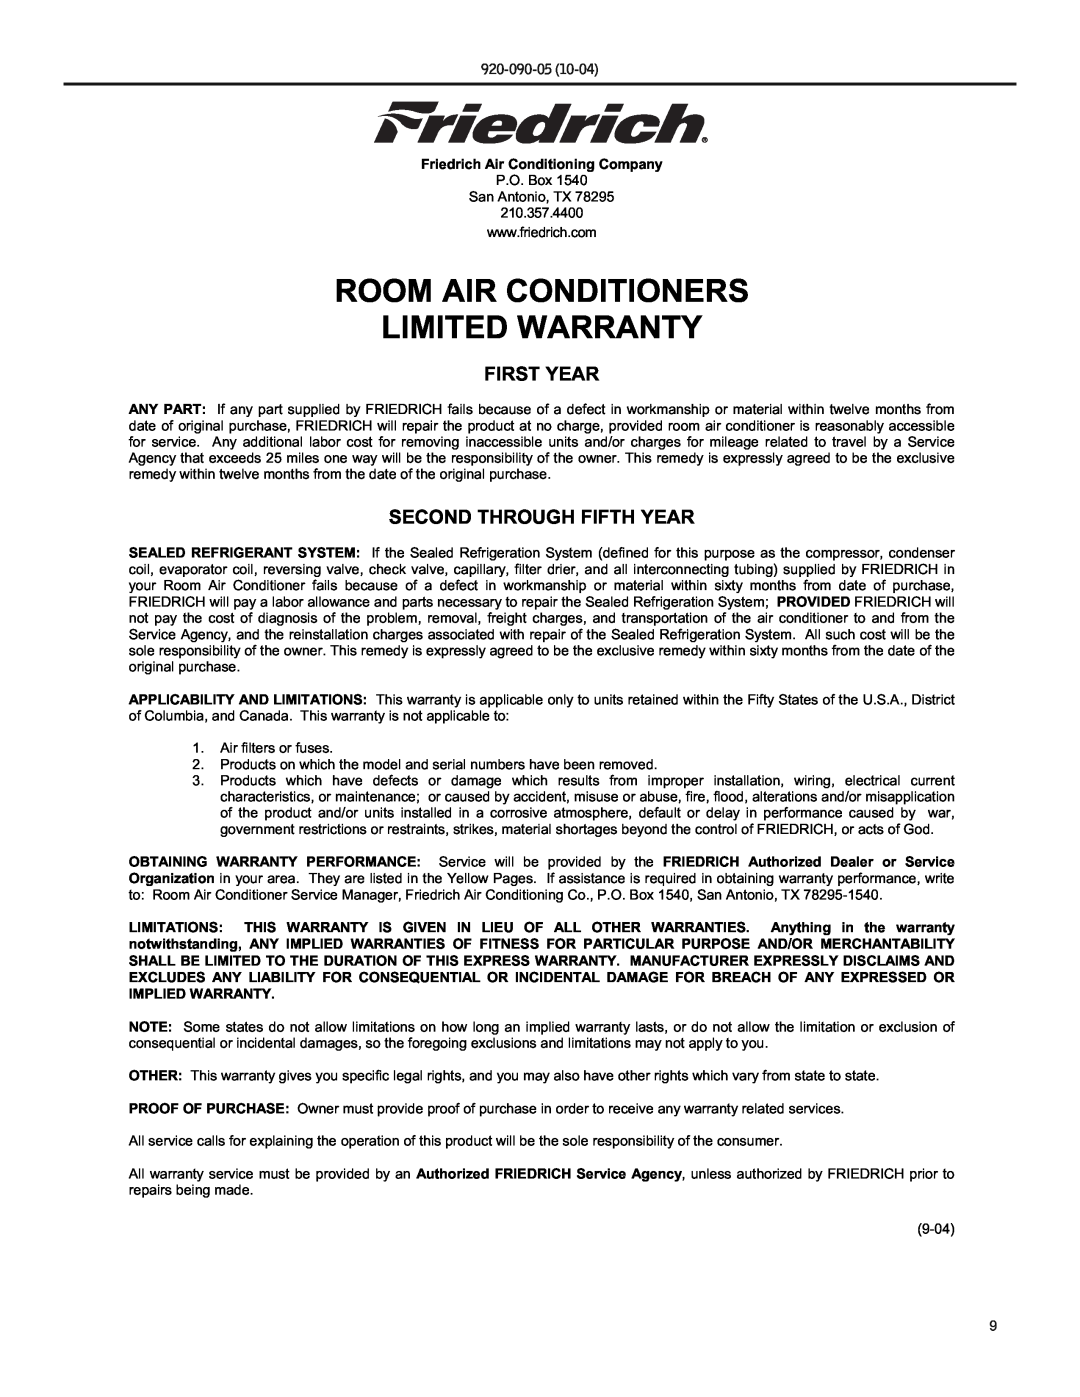 Friedrich SS09 manual Room Air Conditioners Limited Warranty, First Year, Second Through Fifth Year, 920-090-05 